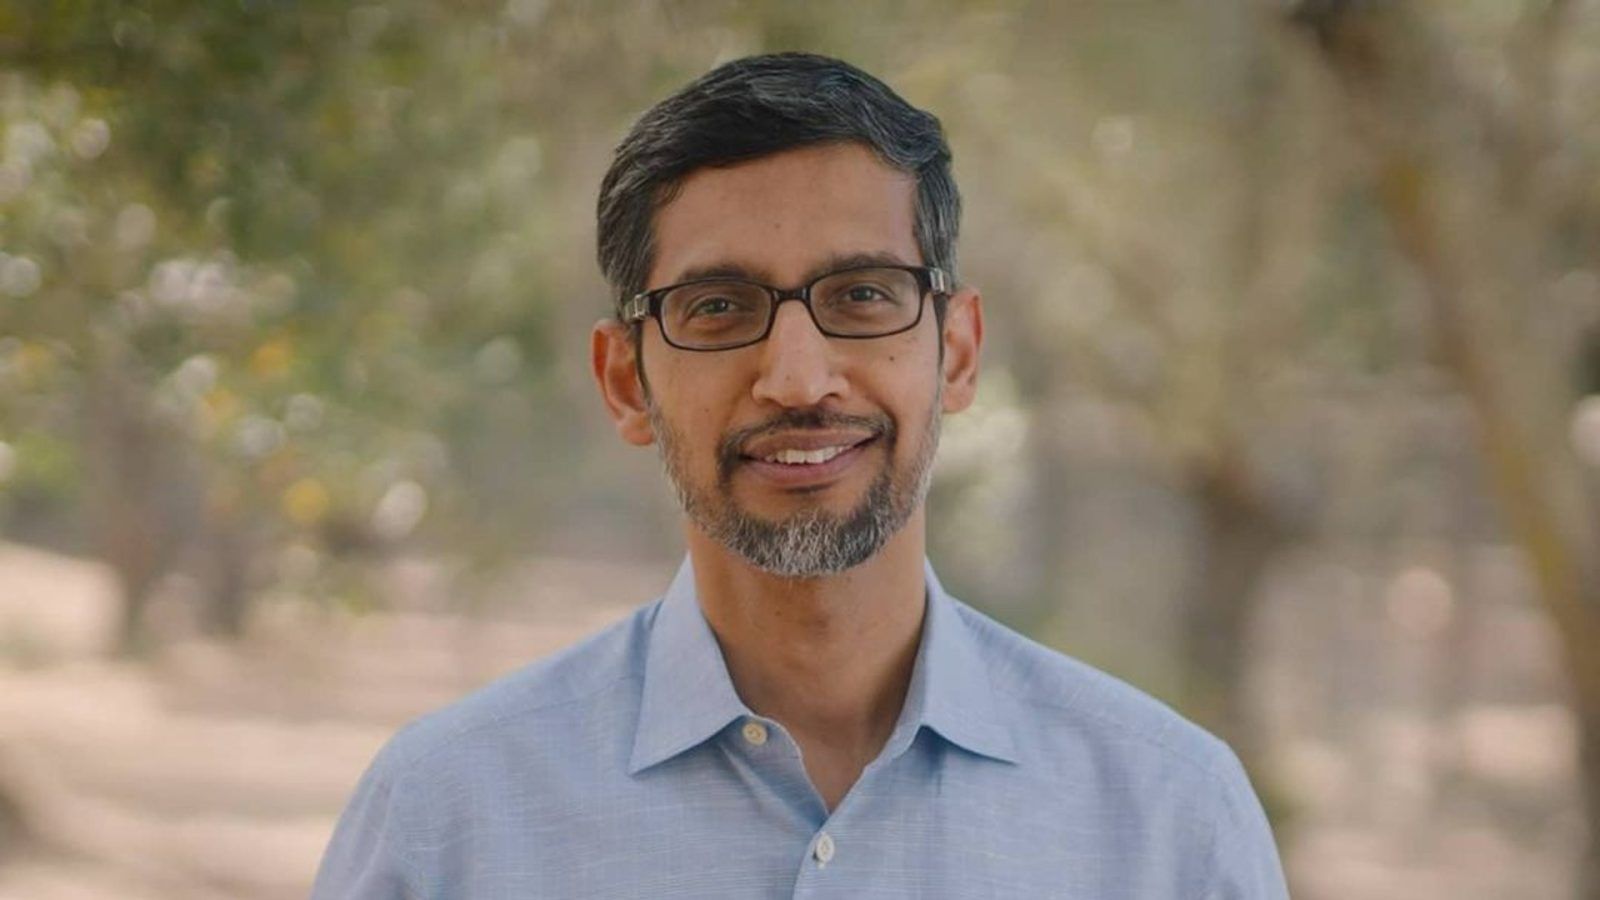 Sundar Pichai net worth All about Google CEO's salary and more